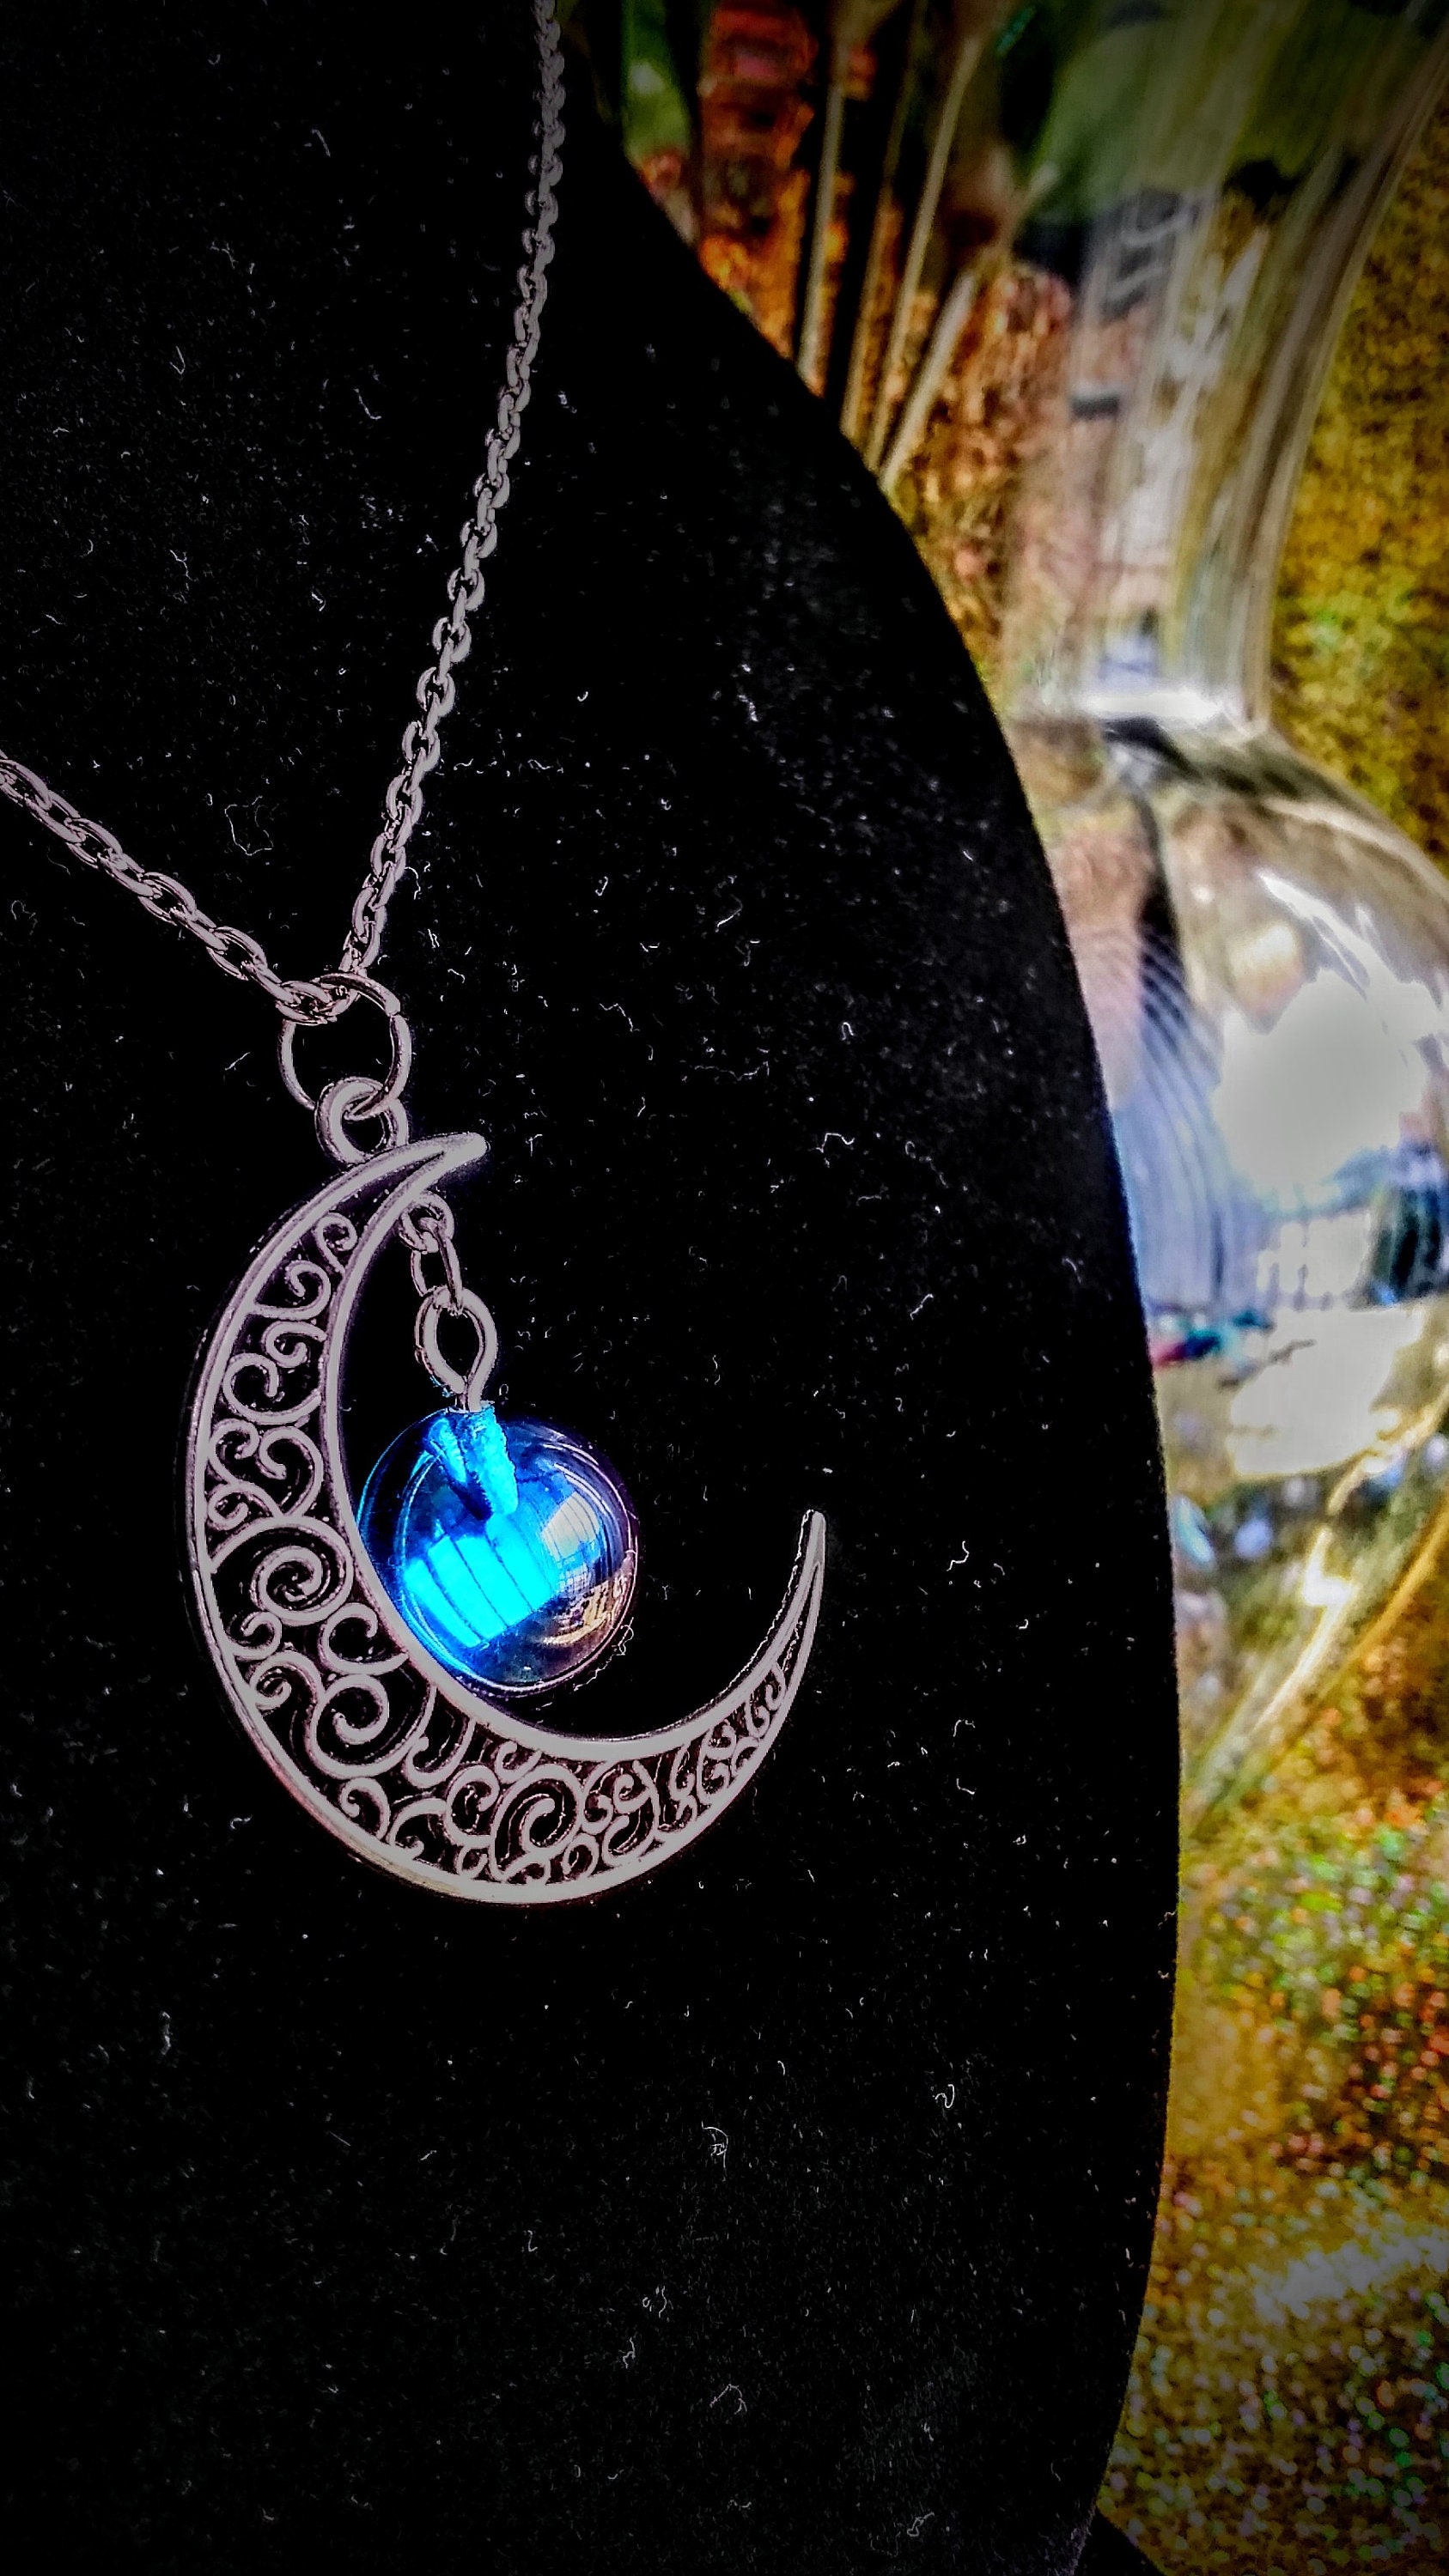 AlterImage Jewelry Eclipse Crescent Moon Glow In The Dark Necklaces 4 Pack  Luminous Jewelry Green Purple Blue & Sky Blue Includes UV Light -  Walmart.com